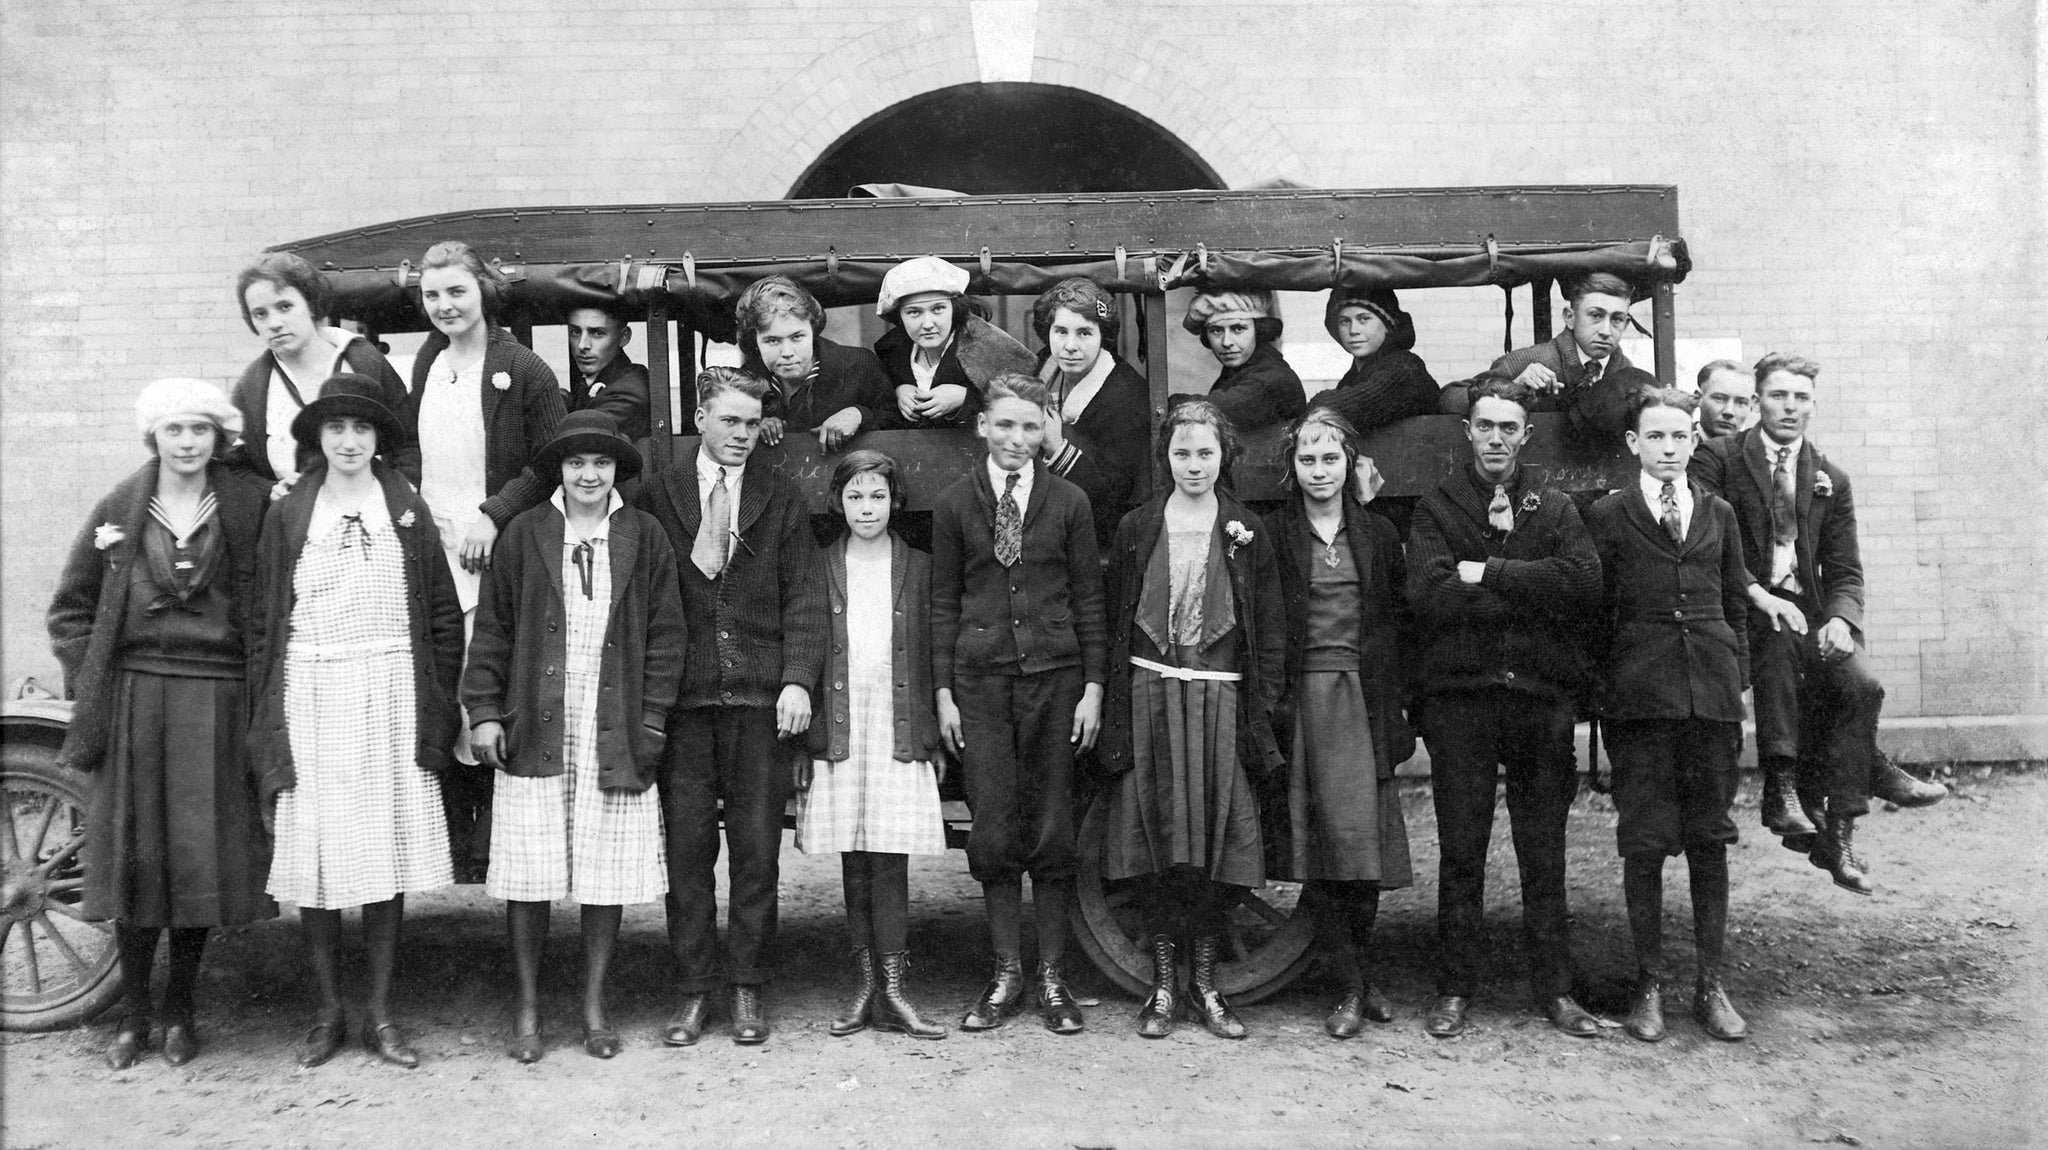 Students with the first school bus in Cleveland County, circa 1920. The bus, driven by Yates Spangler, carried students from the Double Shoals community to Piedmont School in Lawndale. -- Courtesy of Theresa Lowe, Lawndale Museum